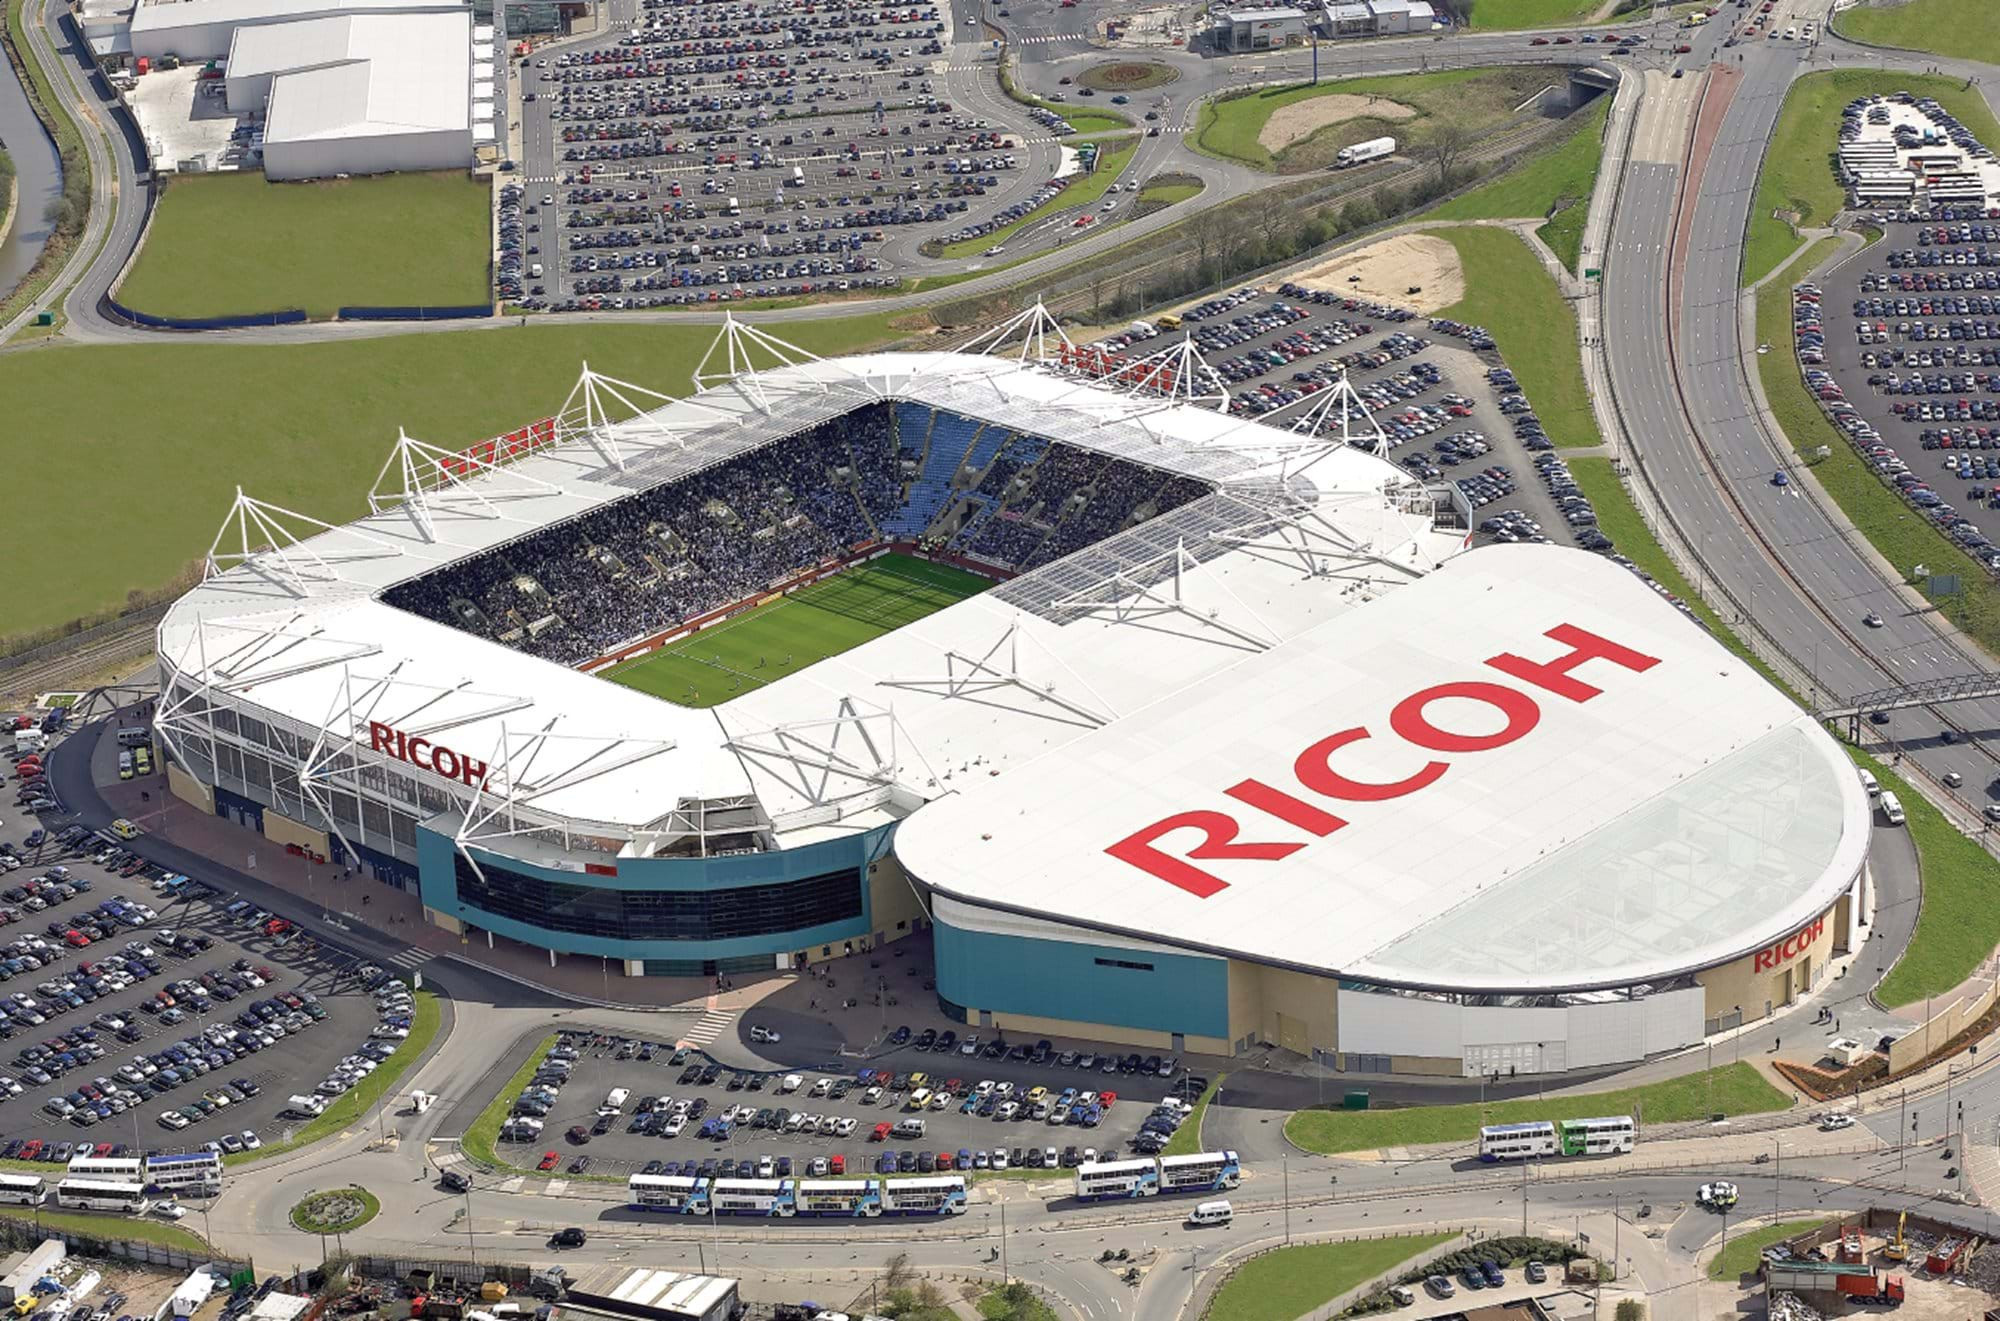 The Ricoh Arena has an exhibition centre linked to its stadium ©Ricoh Arena